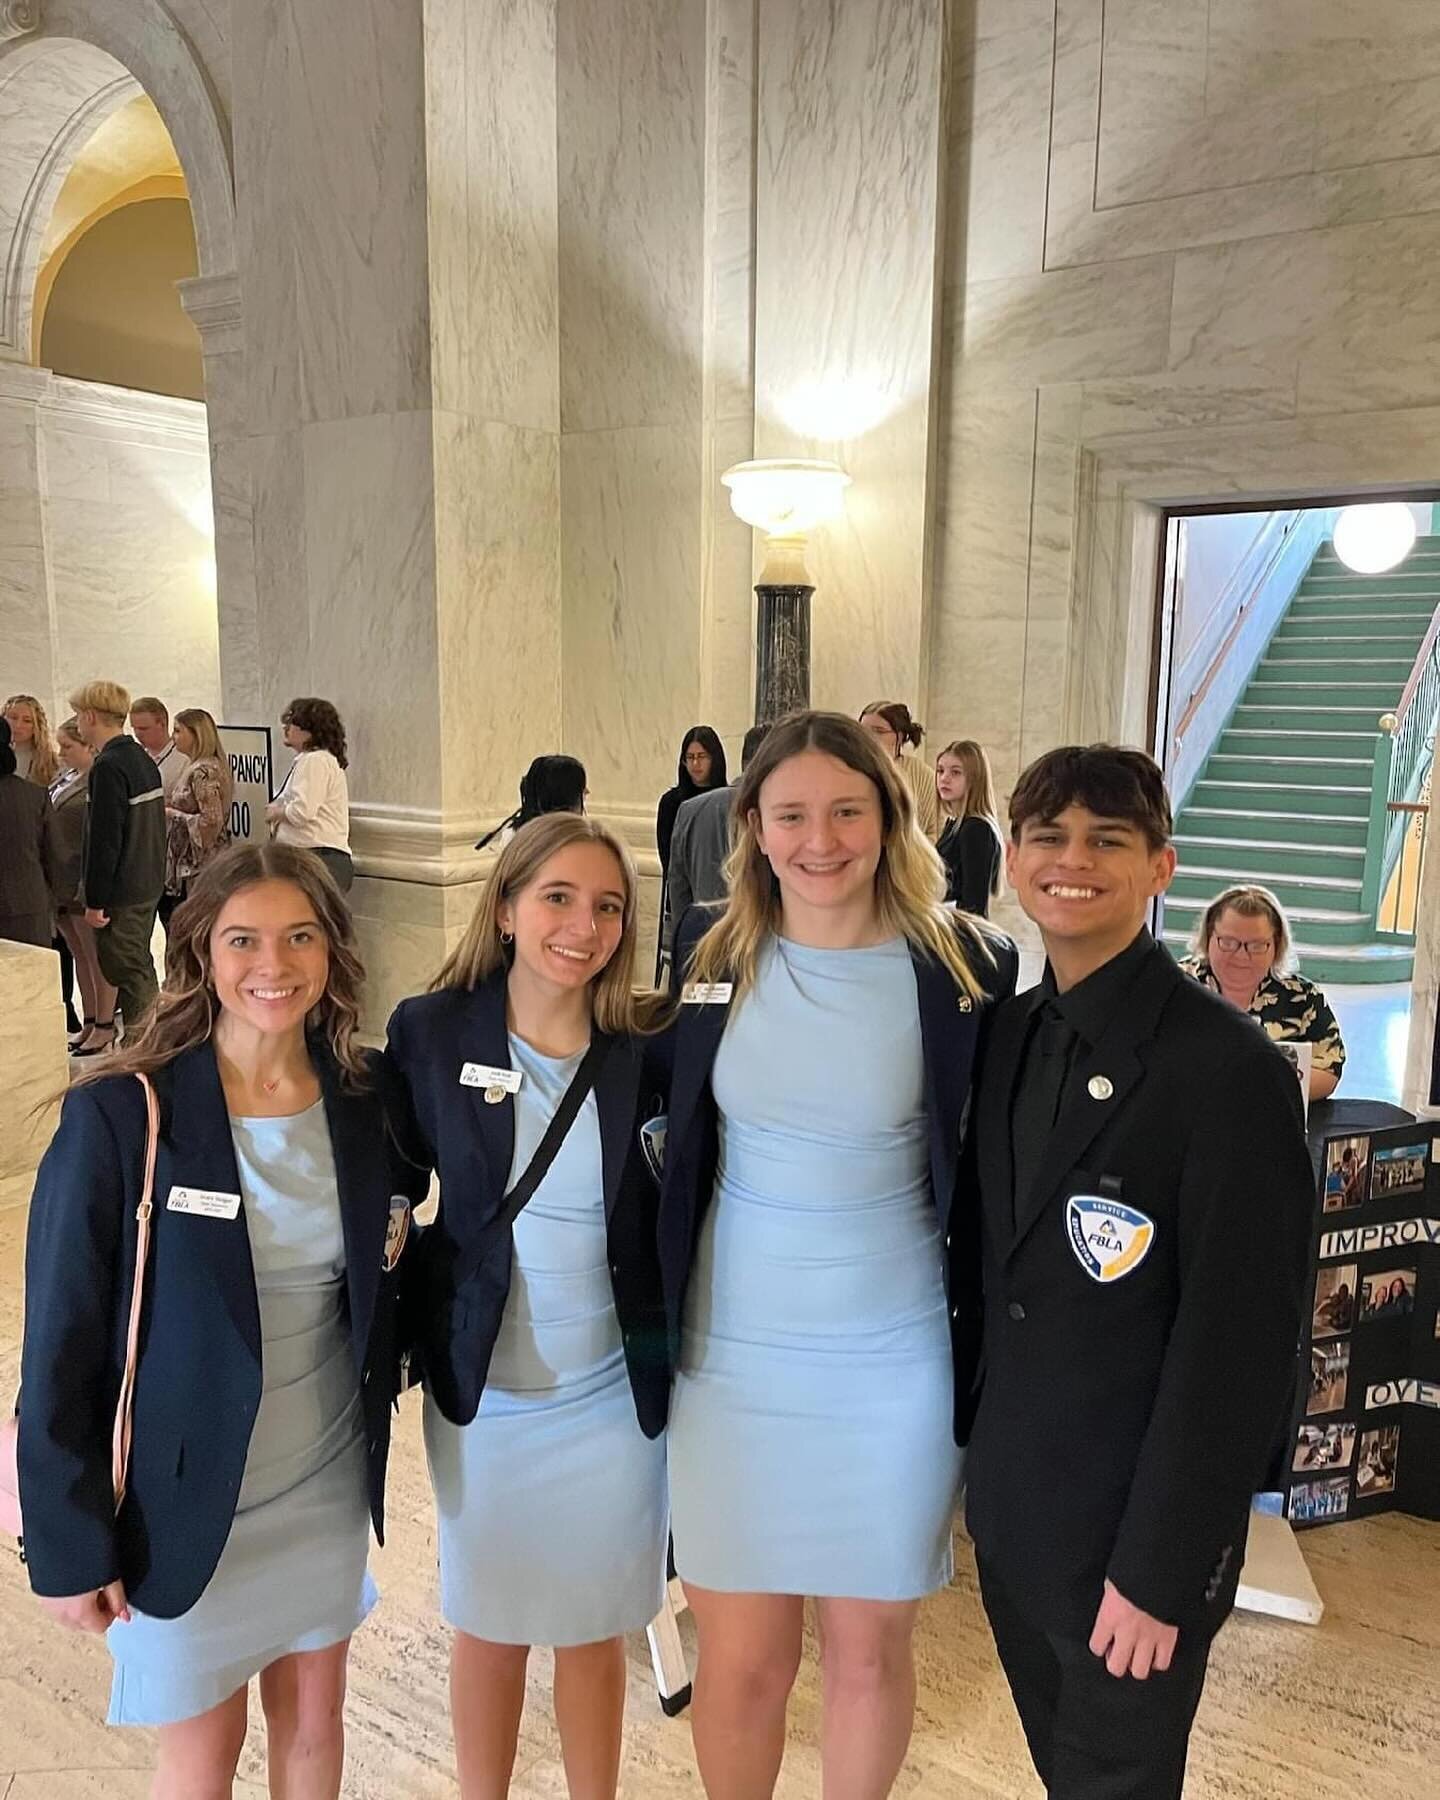 Great day at the capital! Thank you for having us and giving us an opportunity to network! 🩵🩵🩵